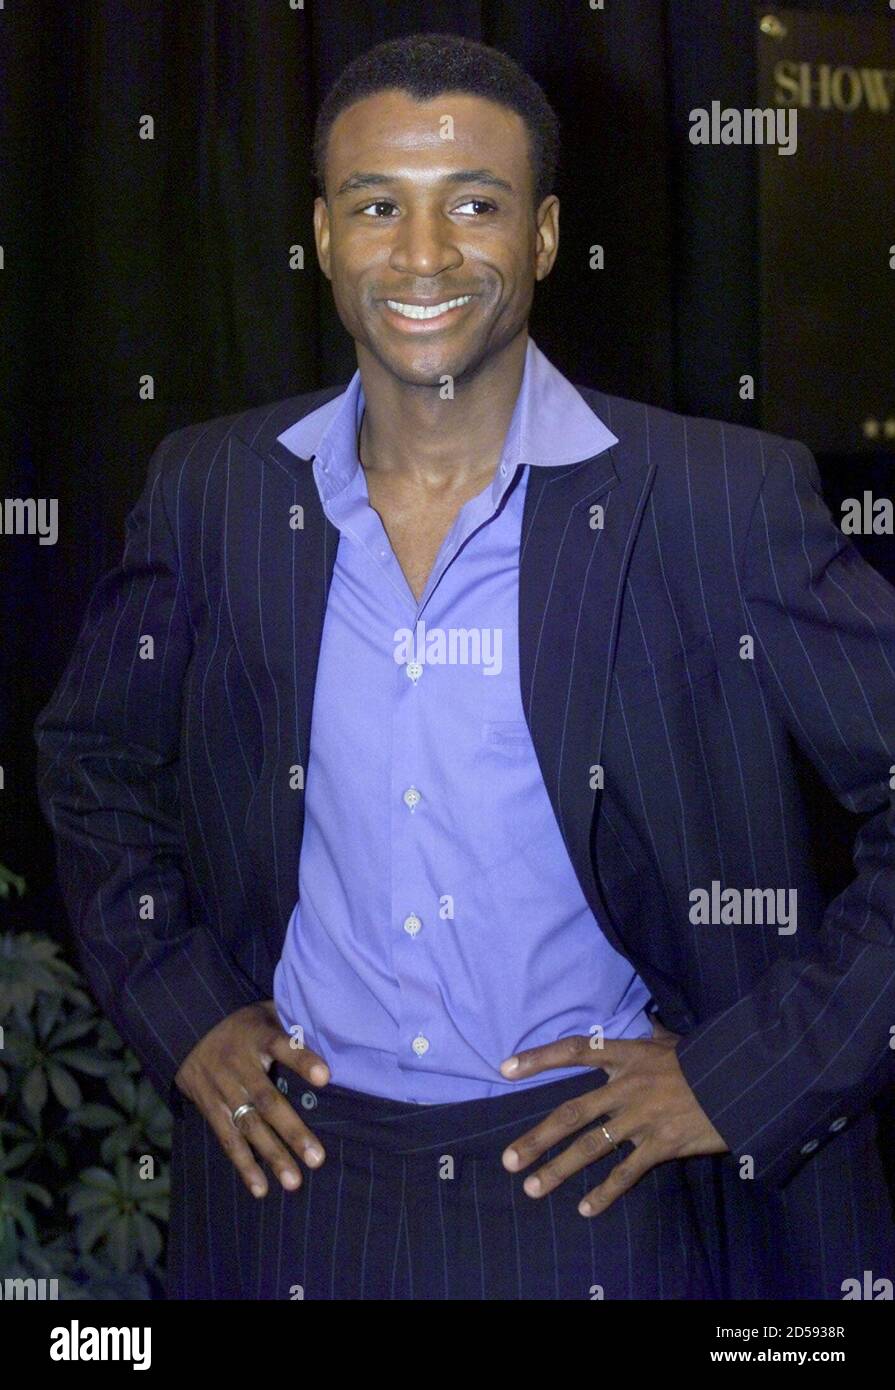 Actor Tommy Davidson arrives for a New Line Cinema luncheon at the ShoWest 2000 convention March 7 in Las Vegas. The actor stars with [Jada Pinkett Smith] in the upcoming movie 'Bamboozled'. ShoWest is an annual convention and trade show for movie theater owners. Stock Photo